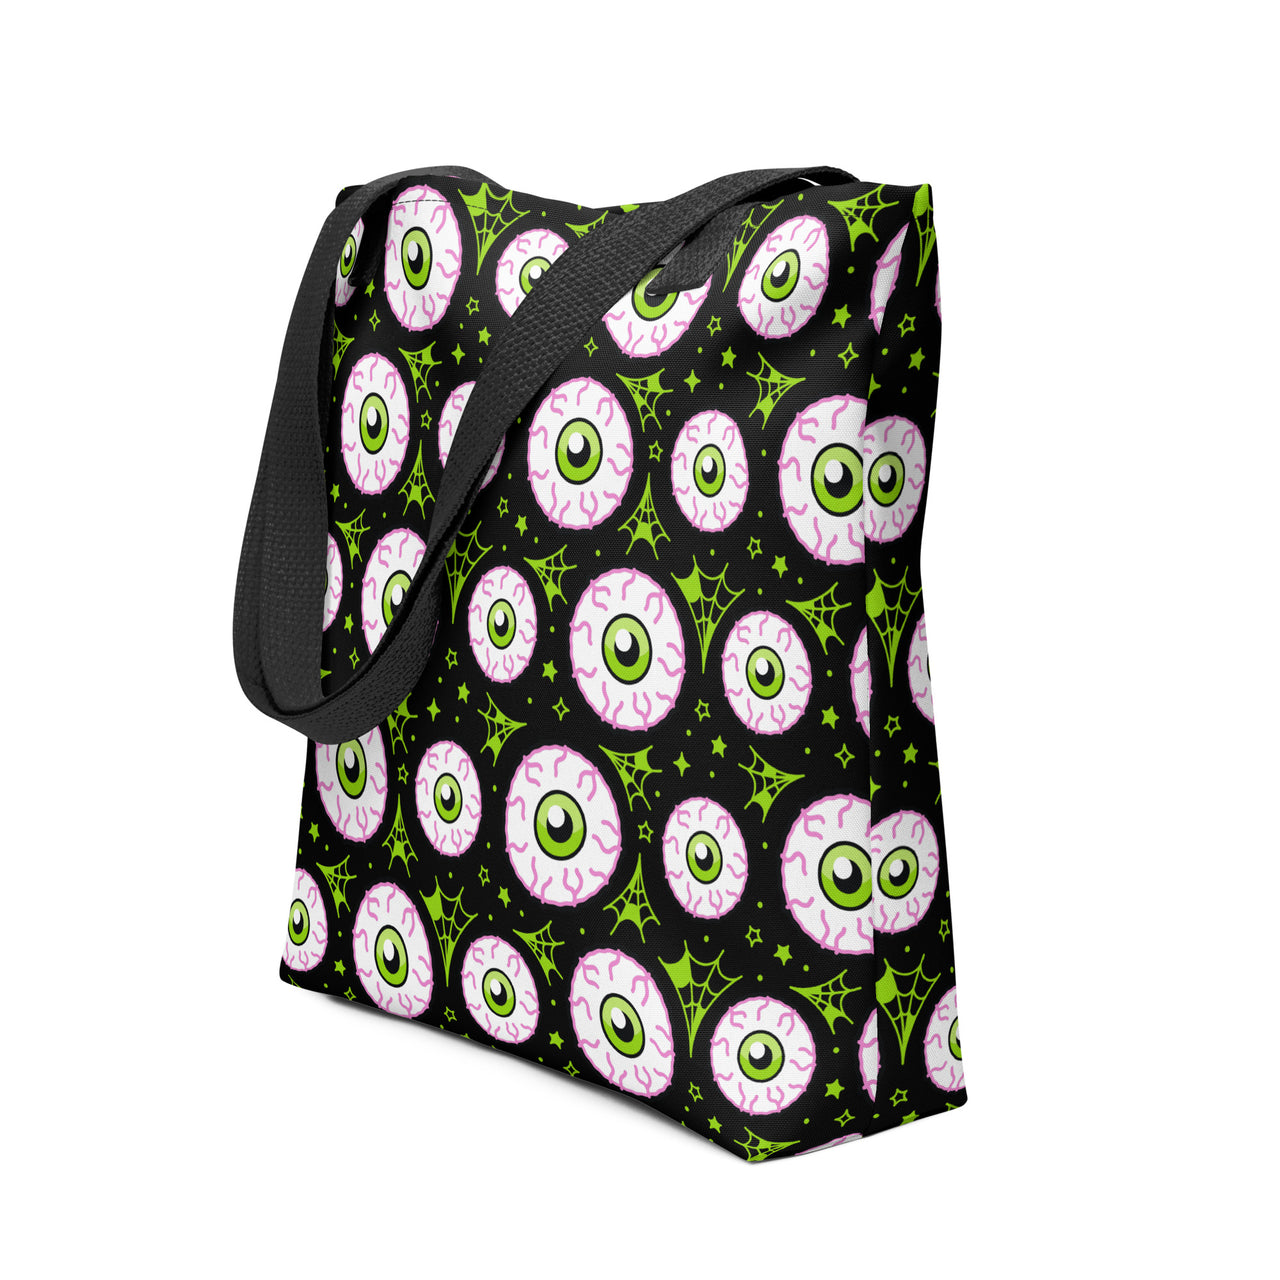 SOURPUSS JEEPERS PEEPERS TOTE BAG